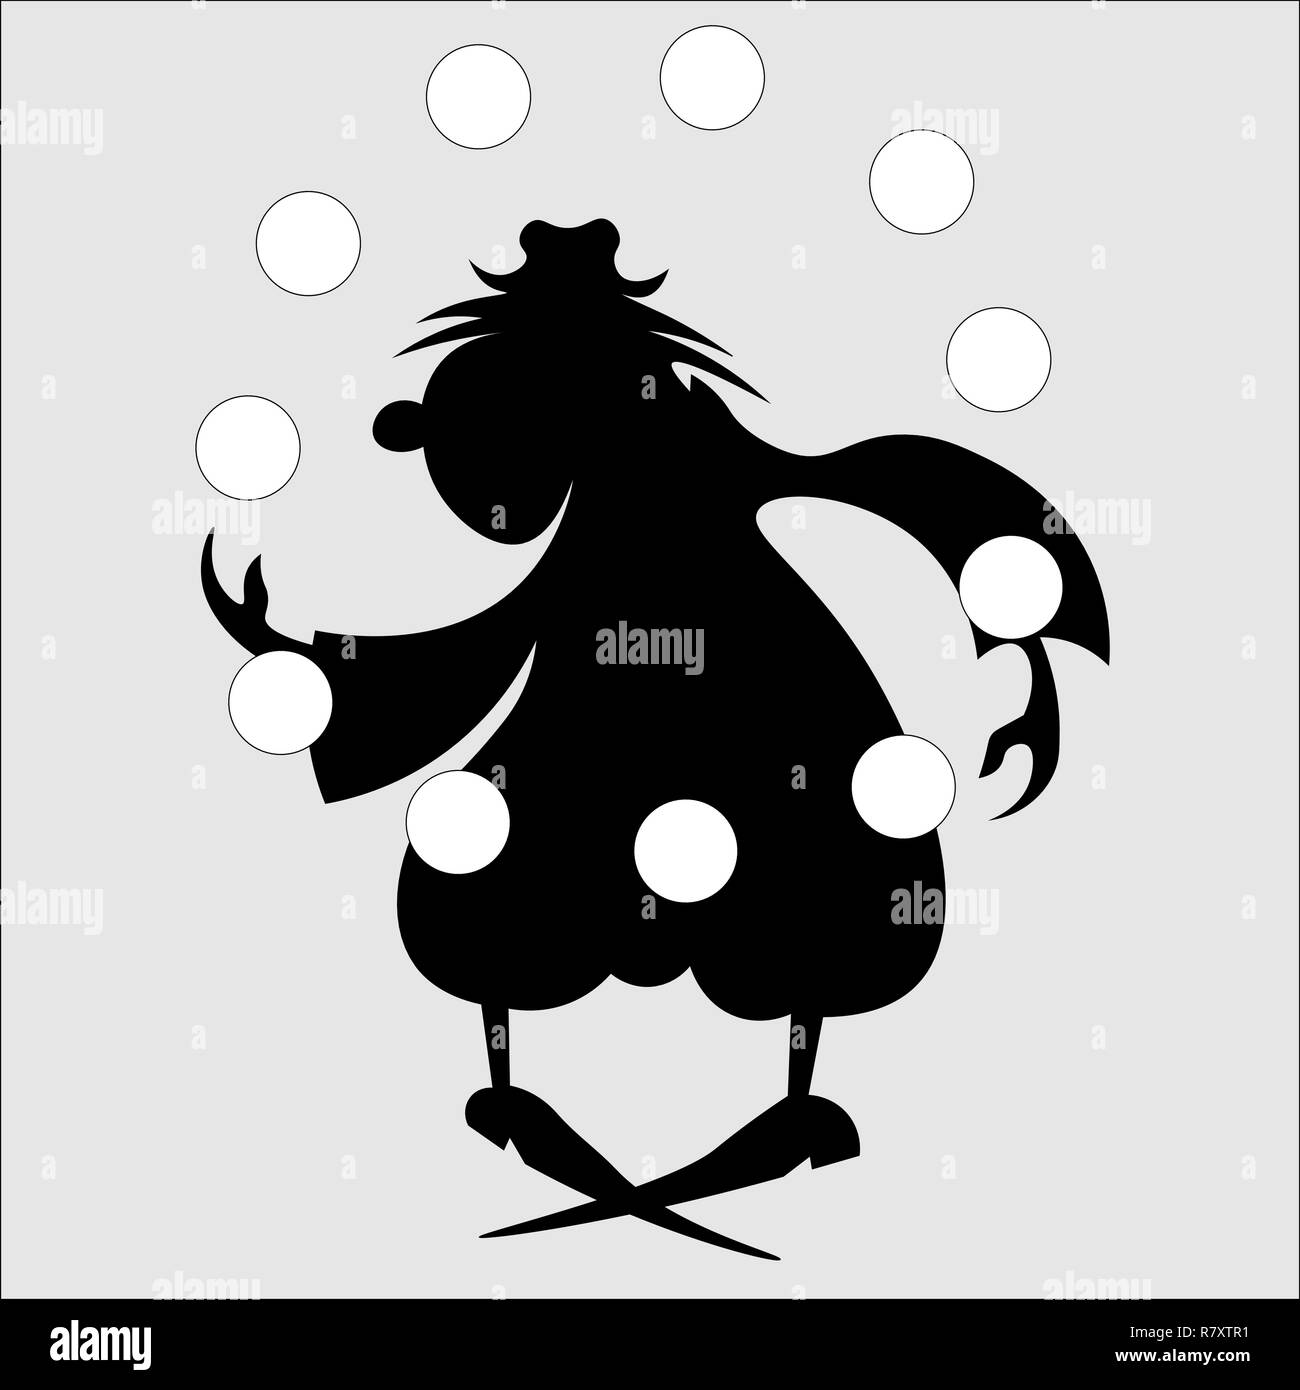 cartoon juggling clown silhouette with white balls Stock Vector